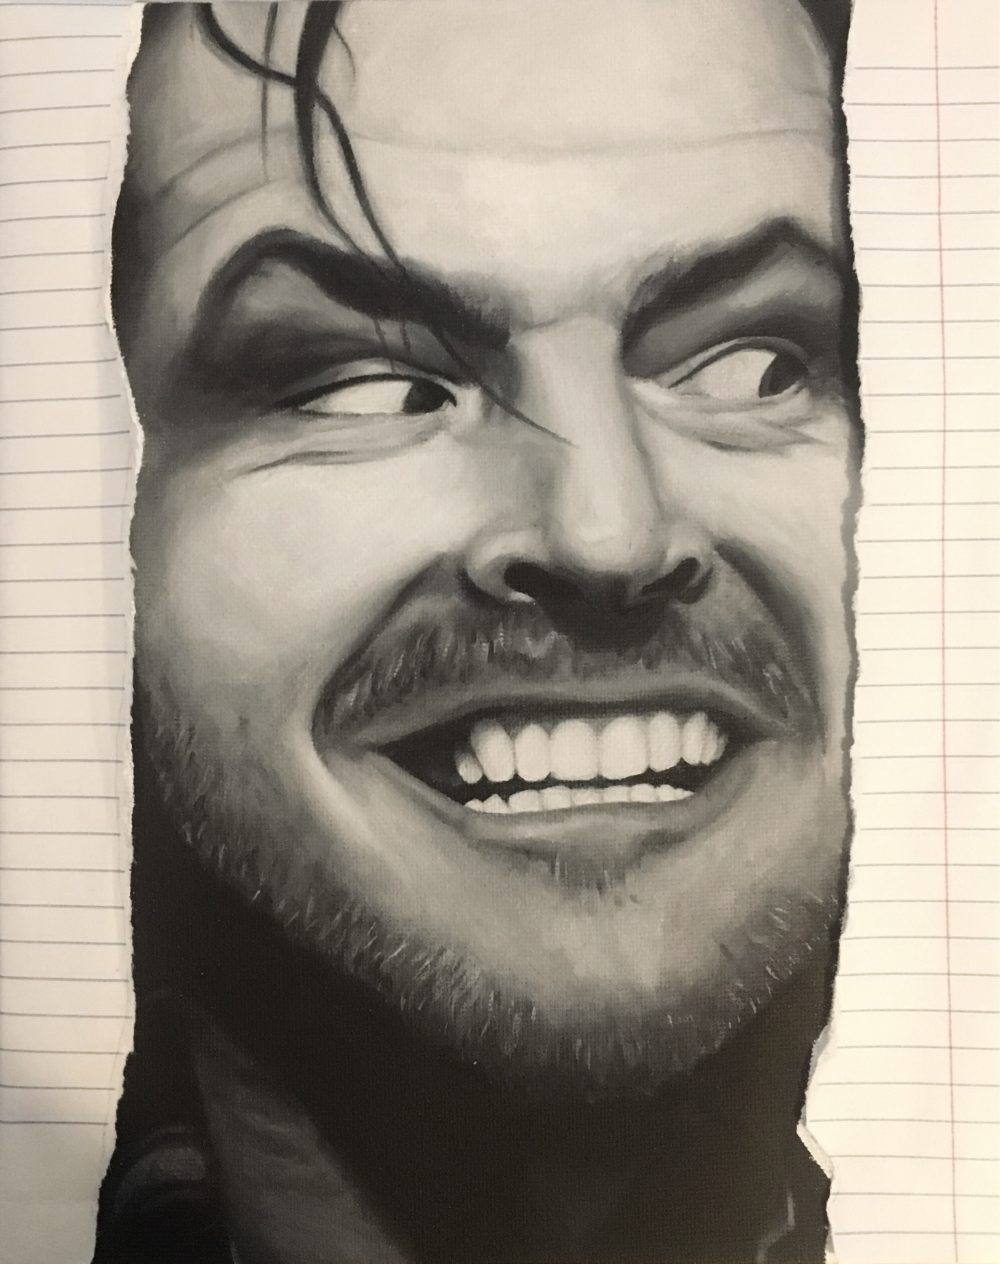 A painting in black and white of Jack Nicholson in the classic "The Shining" movie, his eyes cast to the right as he peers through the ripped notebook paper.